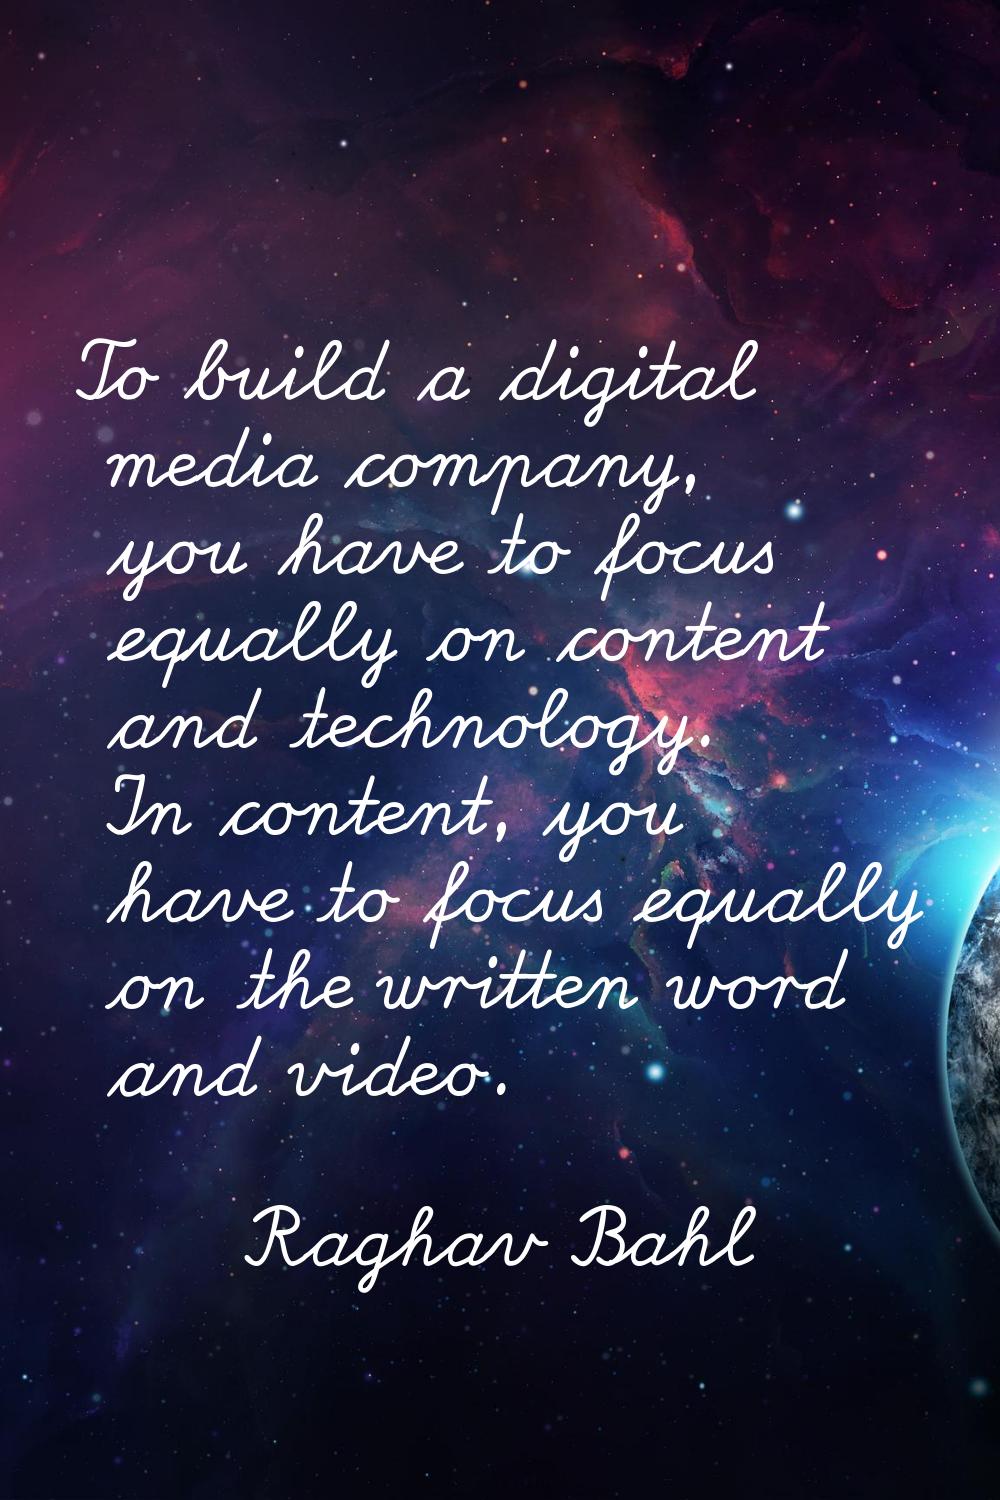 To build a digital media company, you have to focus equally on content and technology. In content, 